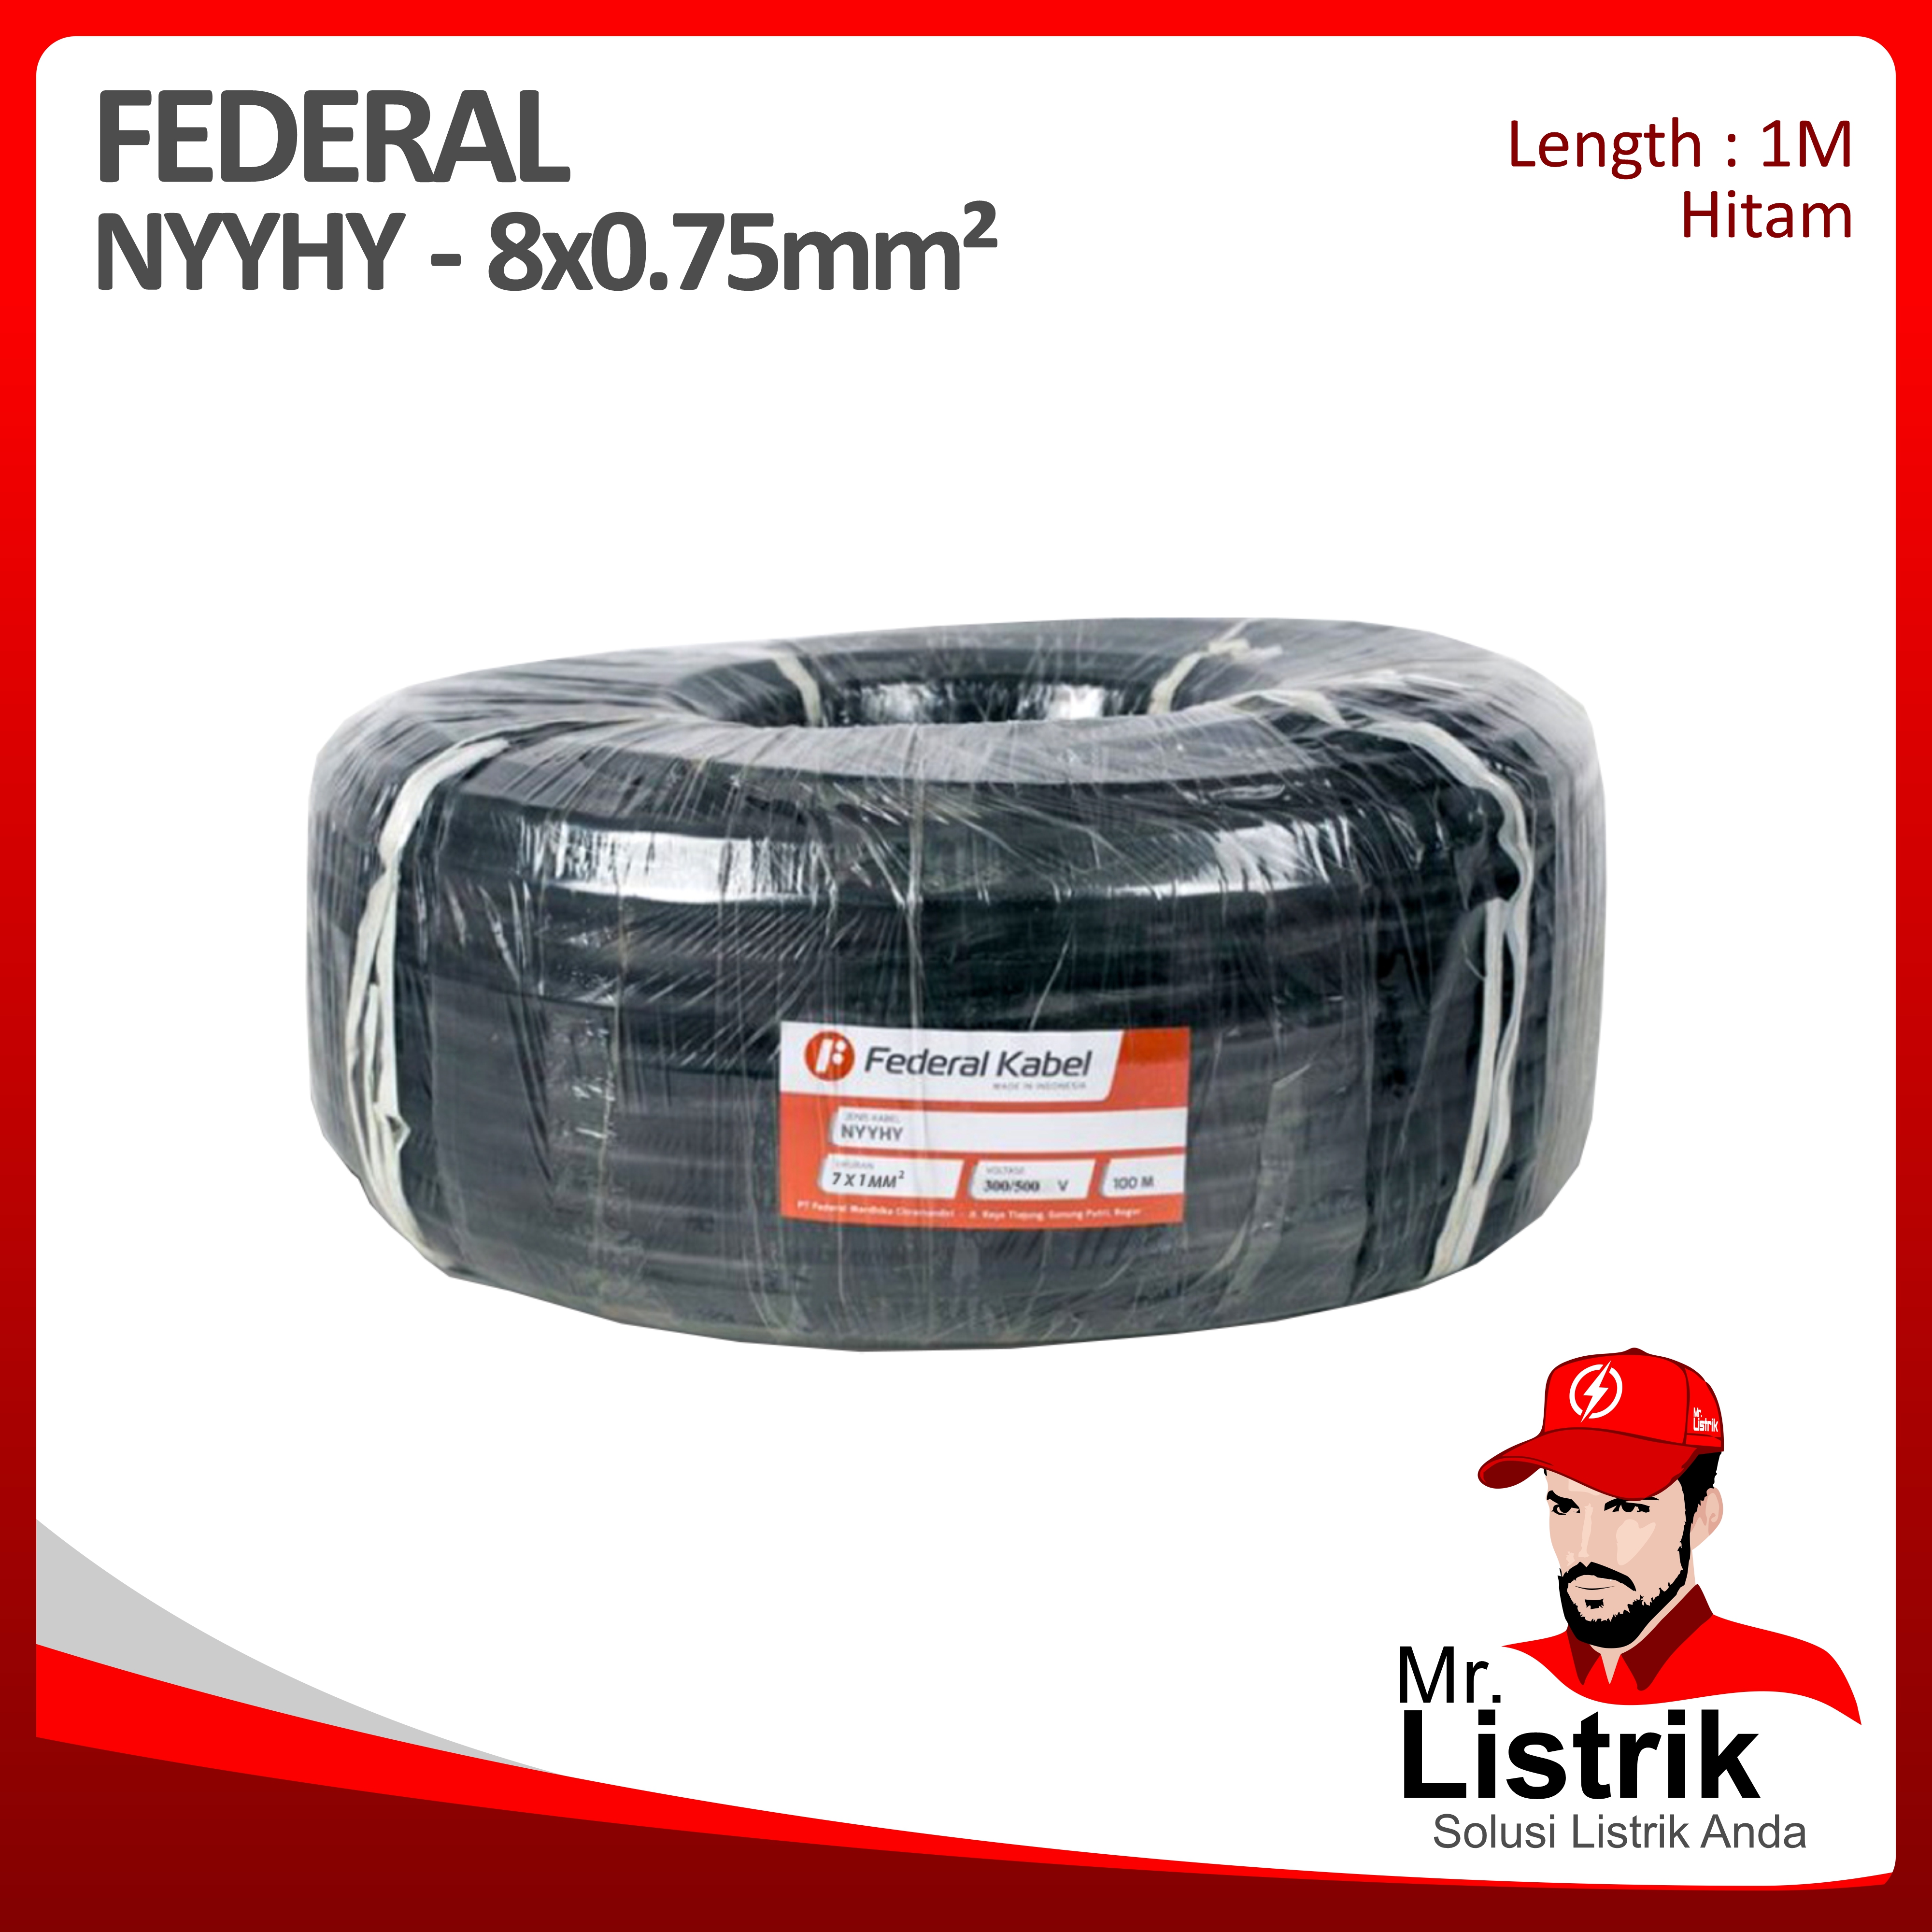 Kabel NYYHY Federal 8x0.75 mm² @1 Mtr